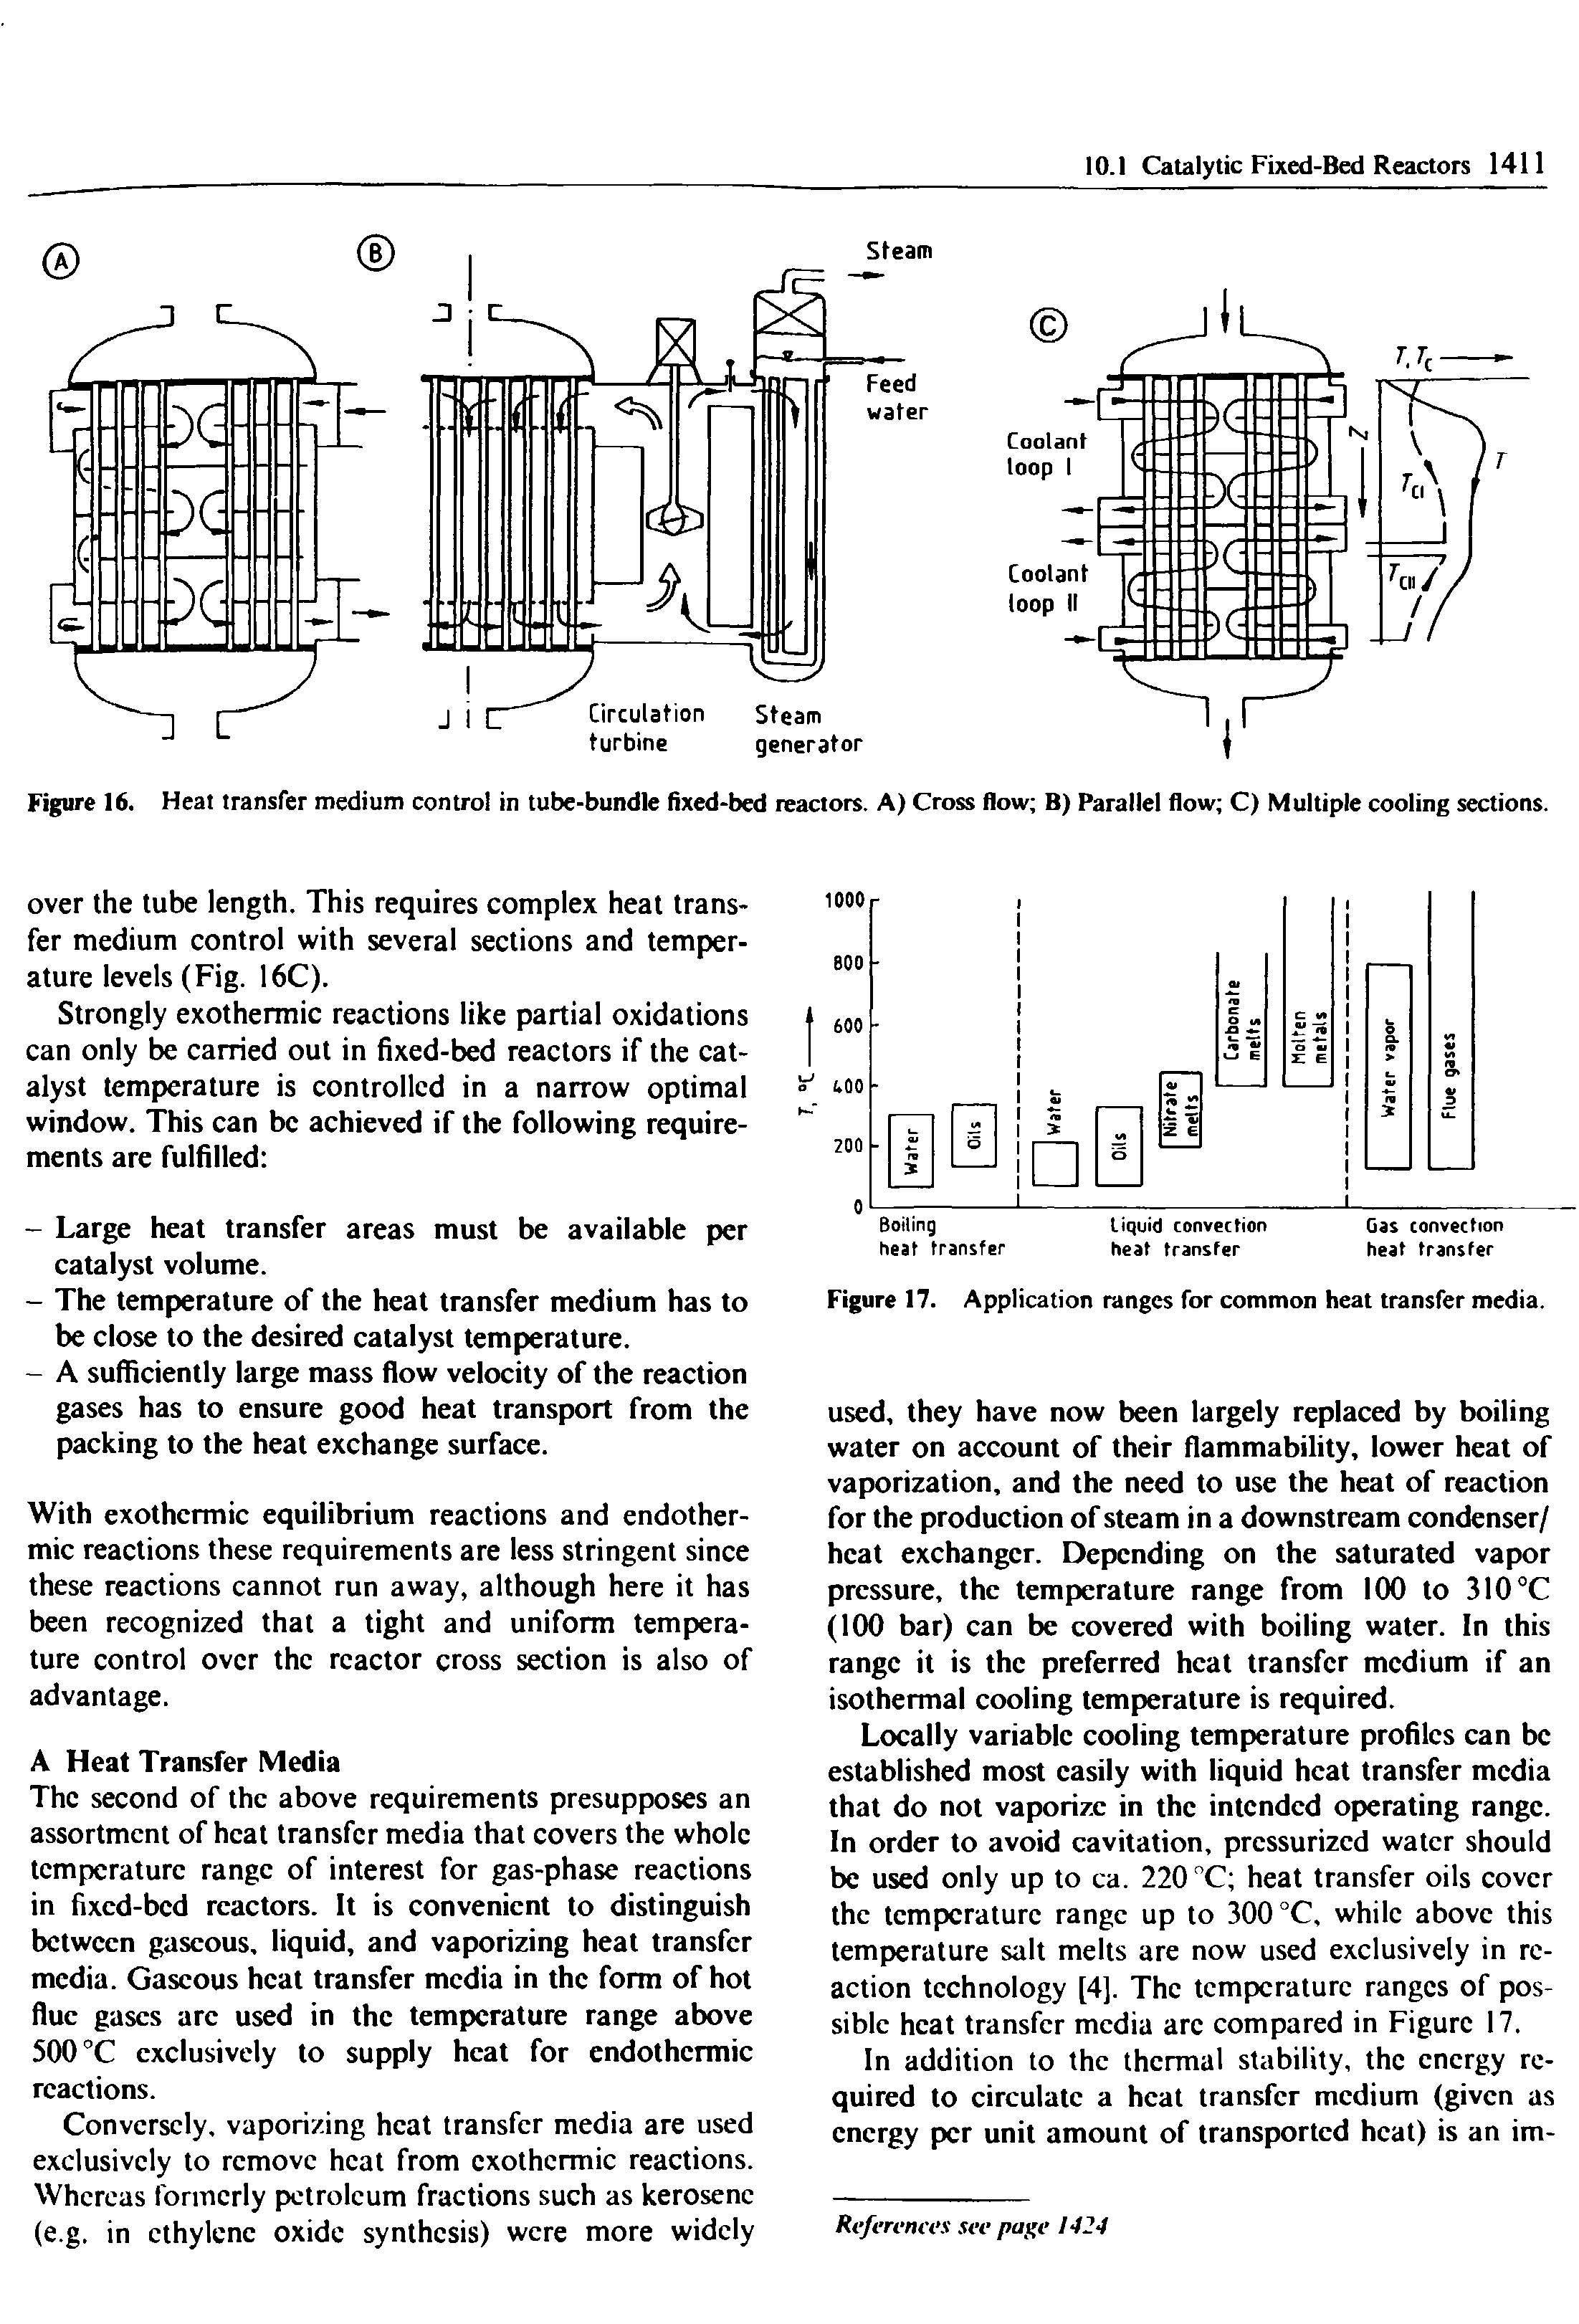 Figure 16. Heat transfer medium control in tube-bundle fixed-bed reactors. A) Cross flow B) Parallel flow C) Multiple cooling sections.